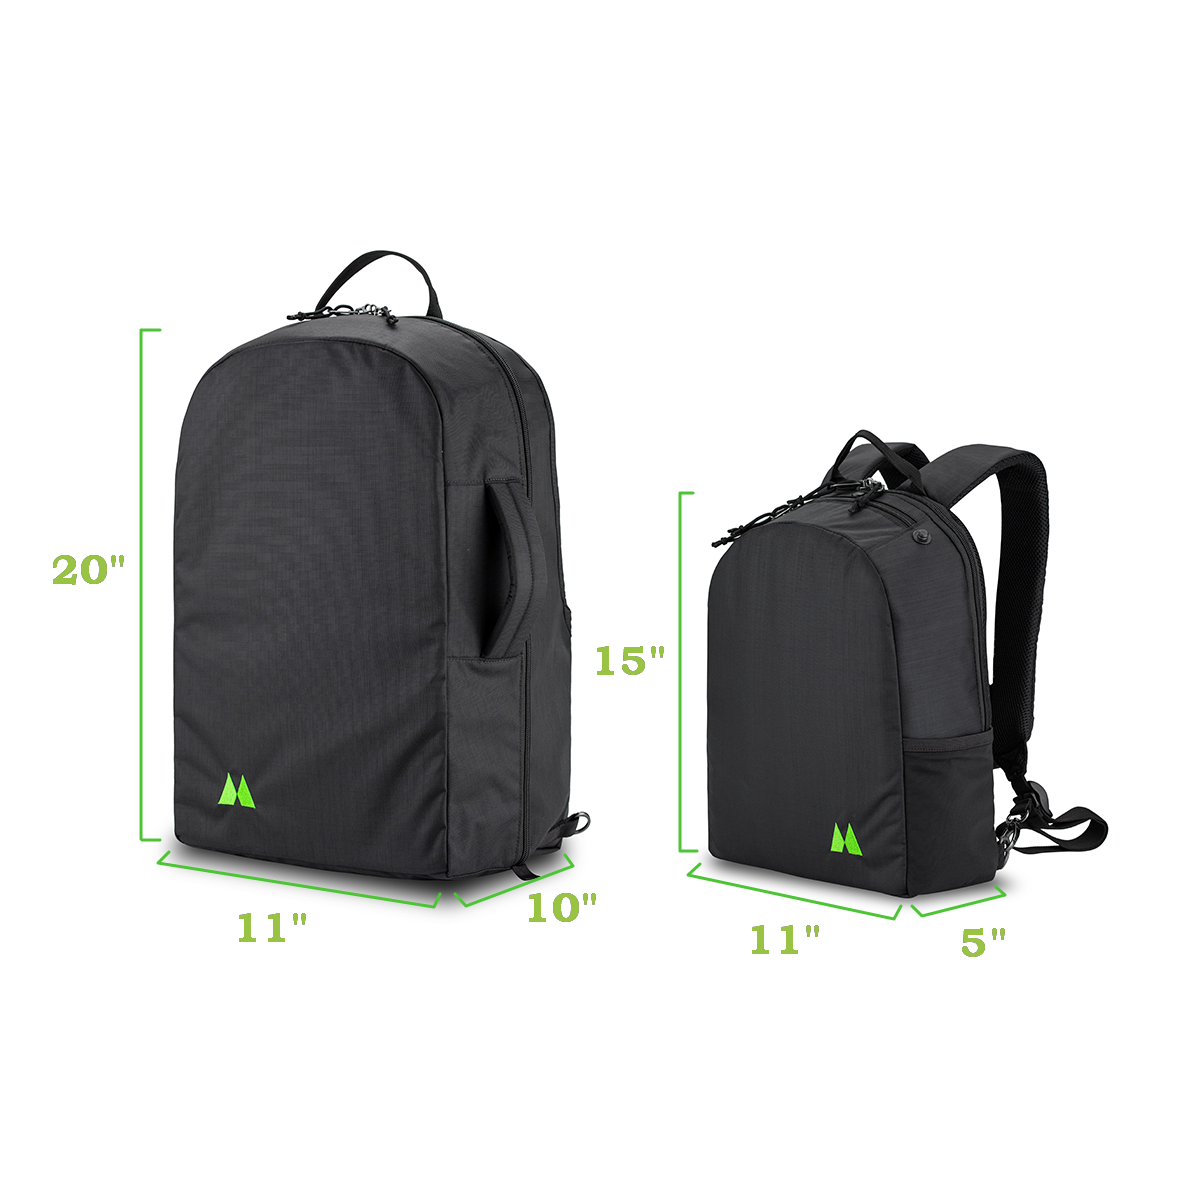 travel pack and day pack dimensiosn